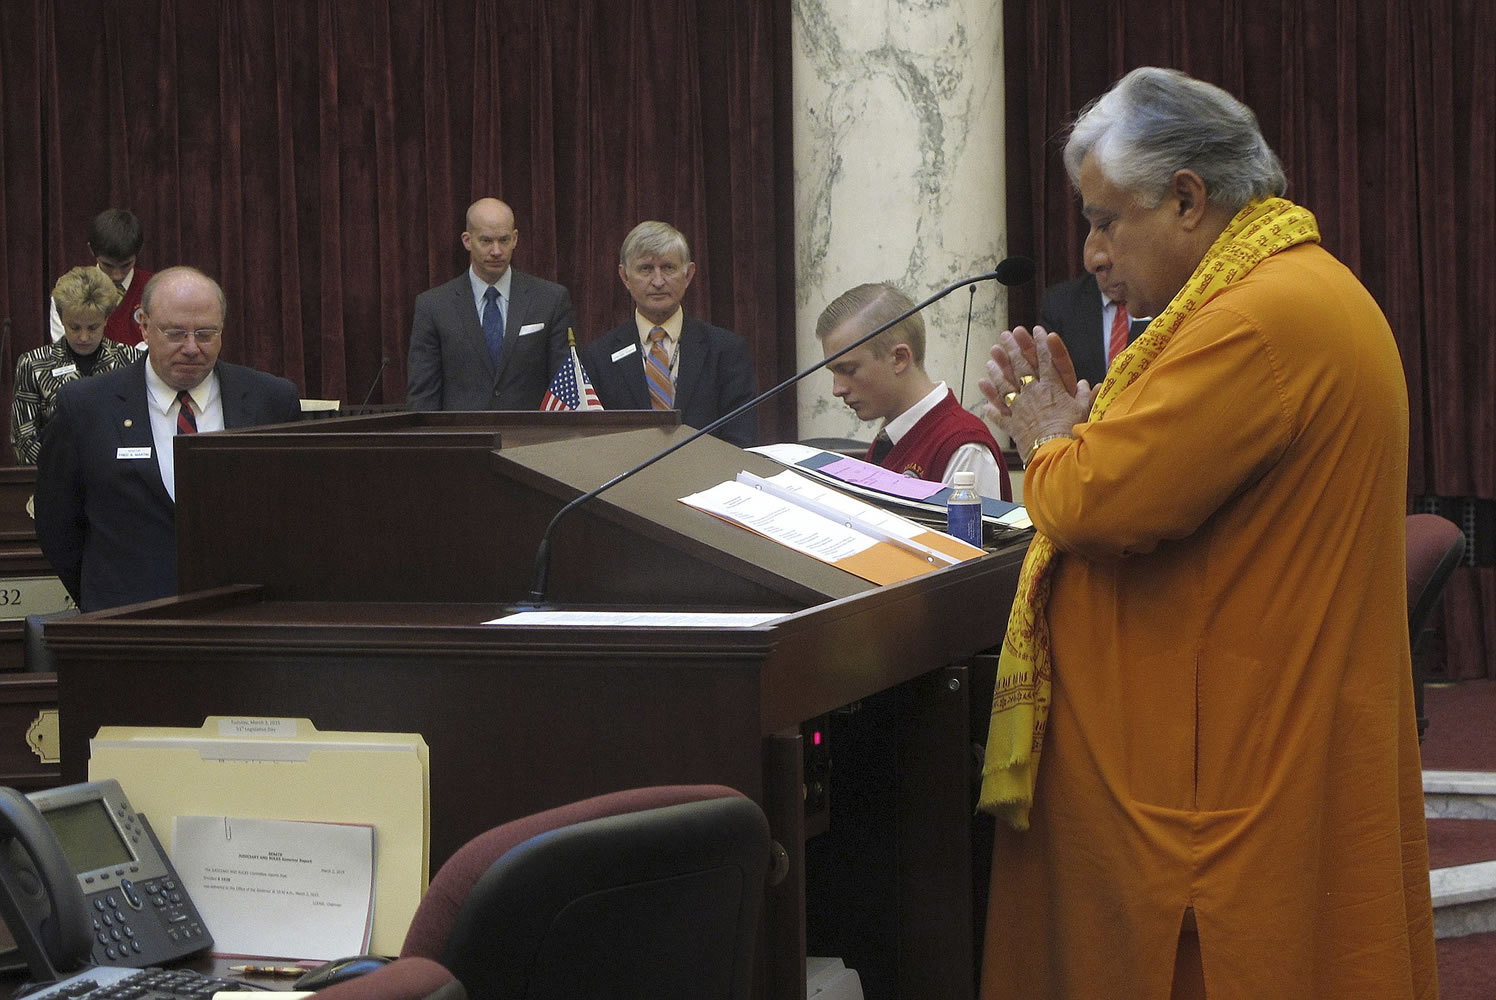 Rajan Zed, right, delivers a Hindu prayer in front of the Idaho Senate on Tuesday in Boise.